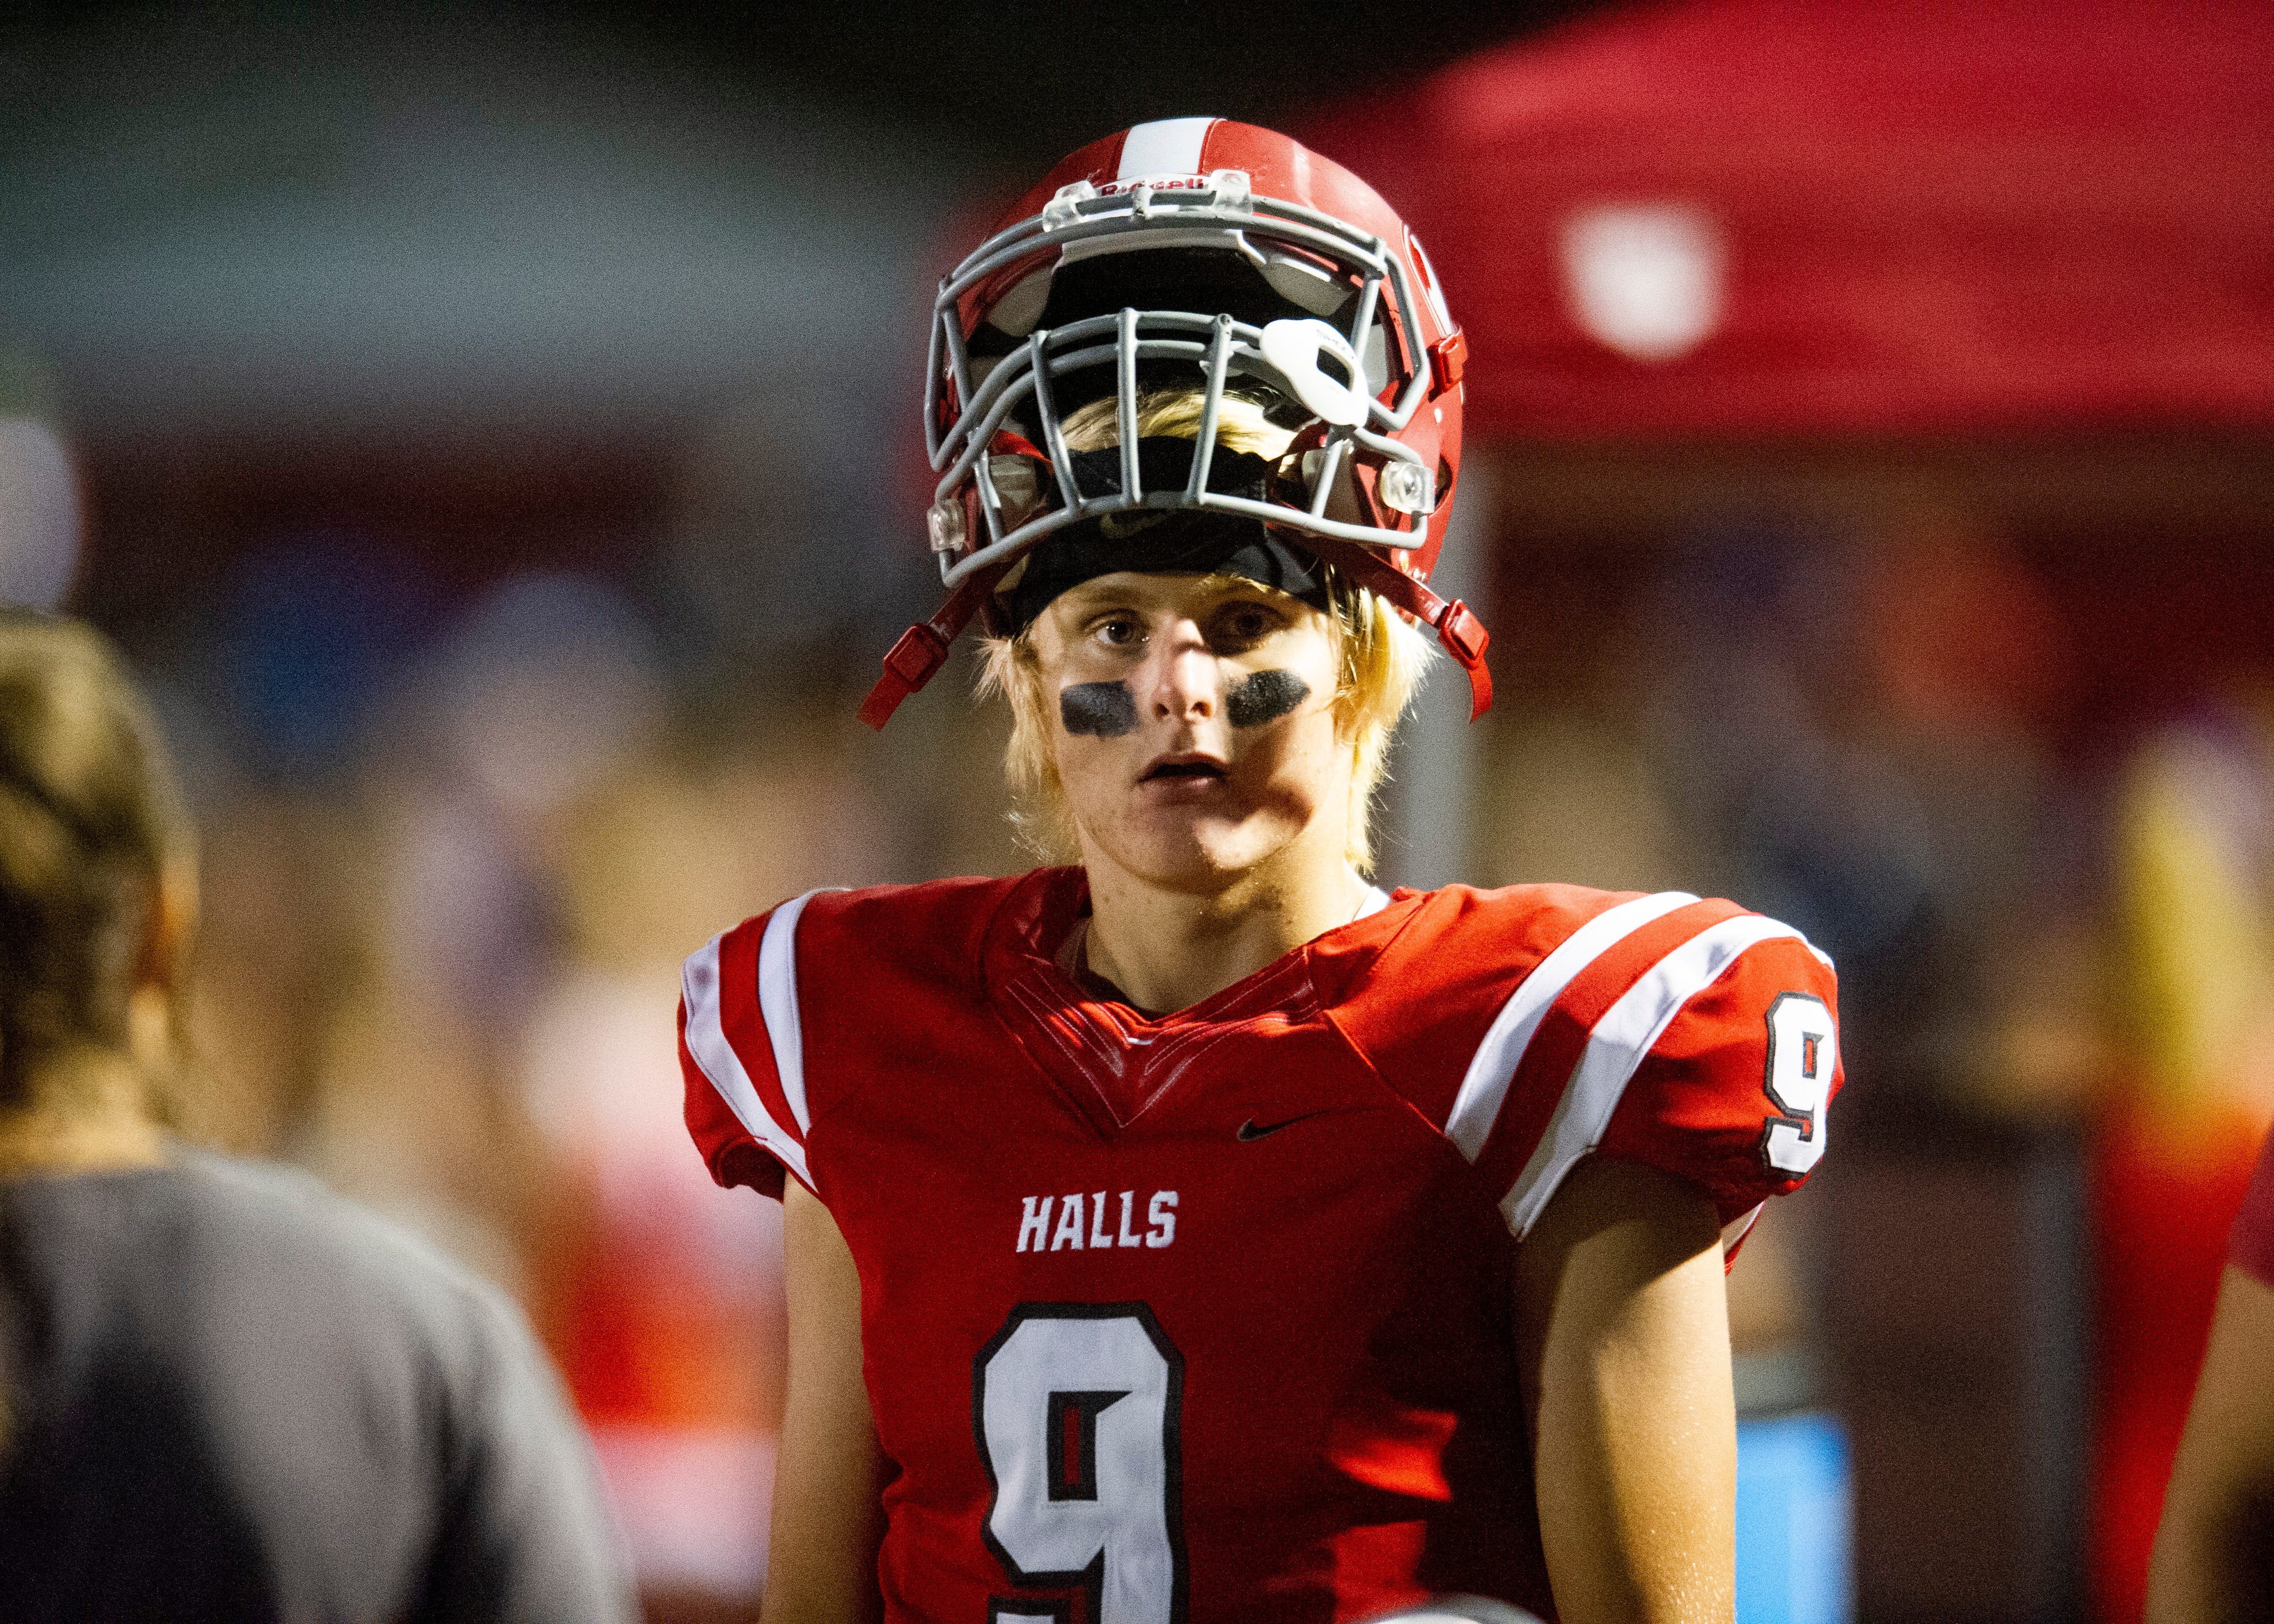 Halls' Simon Williams (9) on the sidelines during the Halls and Central high school football game on Friday, October 4, 2019 at Halls High School.